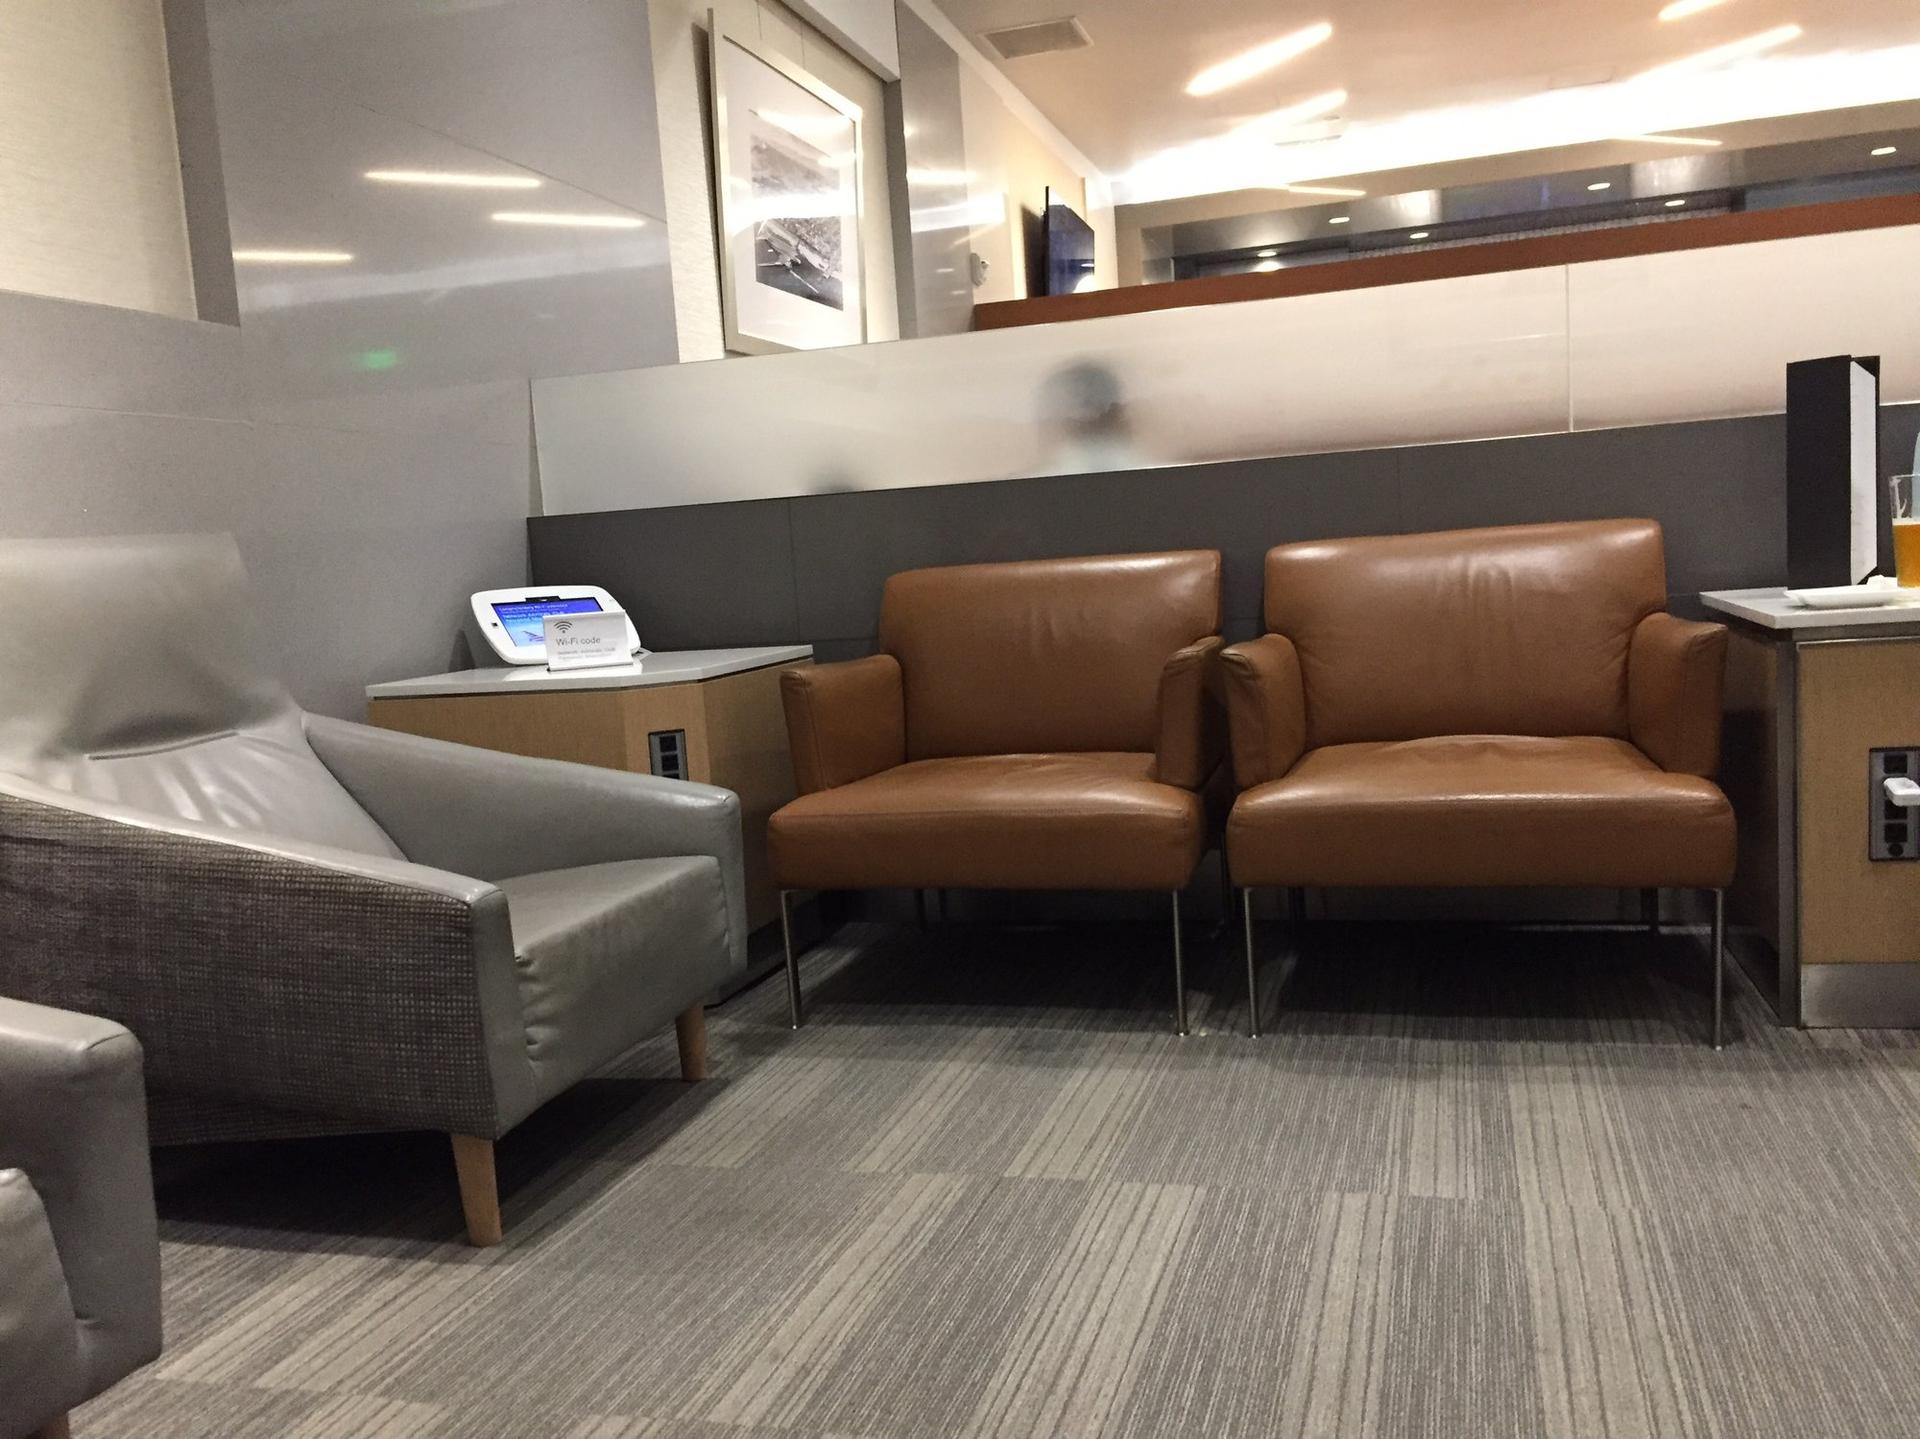 American Airlines Admirals Club image 35 of 43